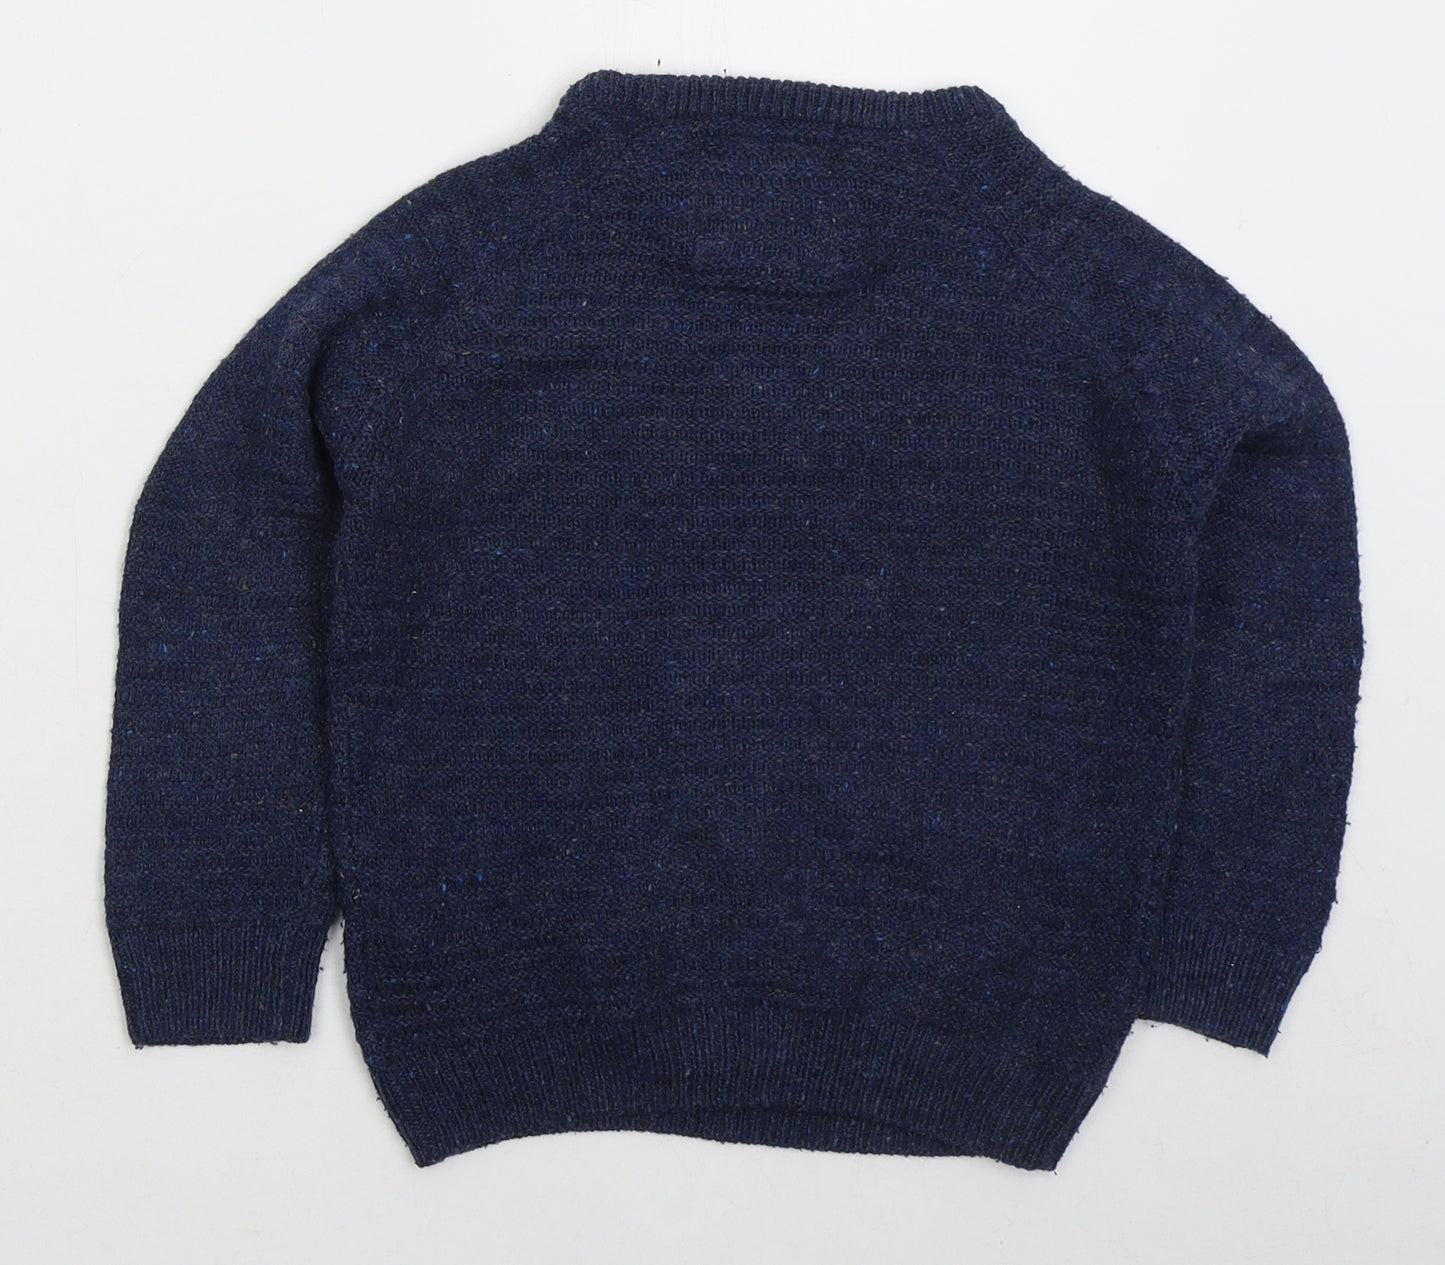 Primark Boys Blue Crew Neck Acrylic Pullover Jumper Size 4-5 Years Pullover